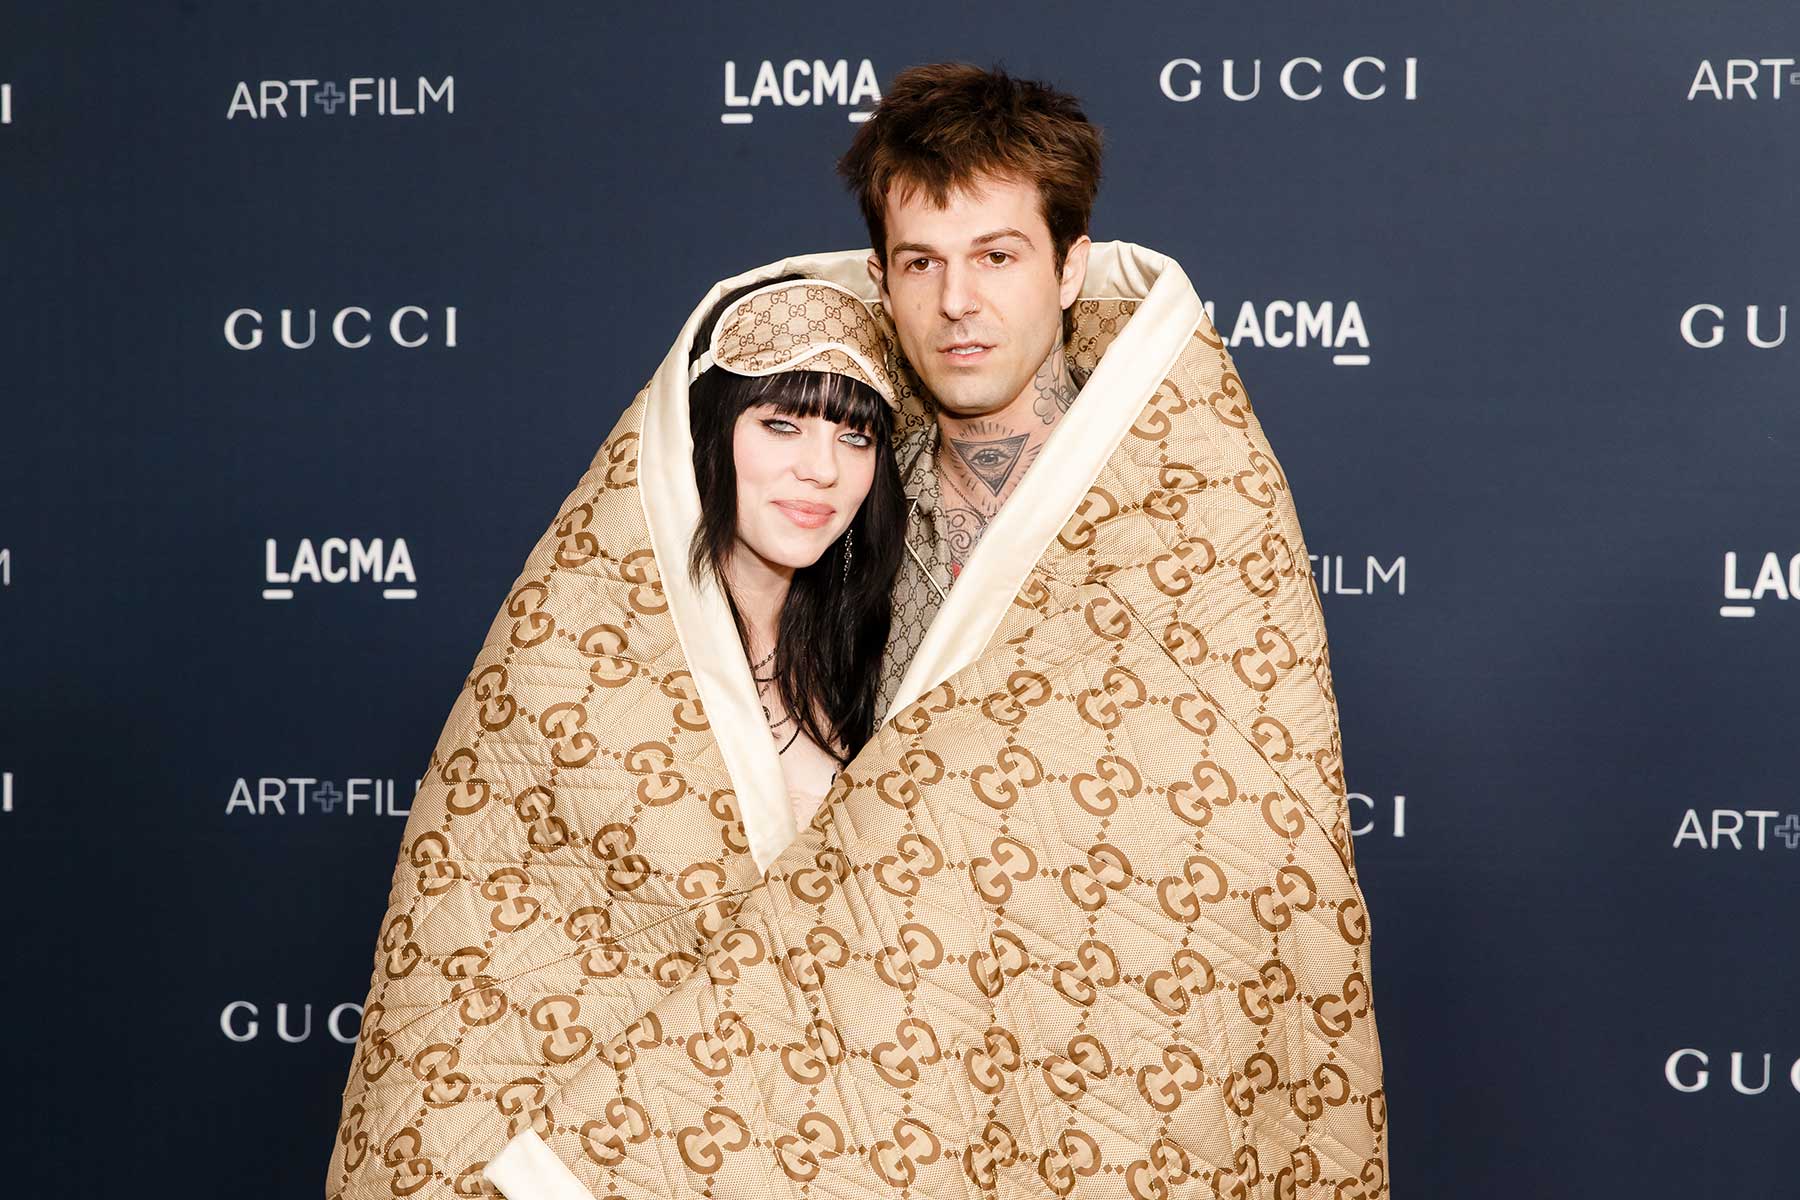 Billie Eilish & Jesse Rutherford Made it Official in Custom Gucci